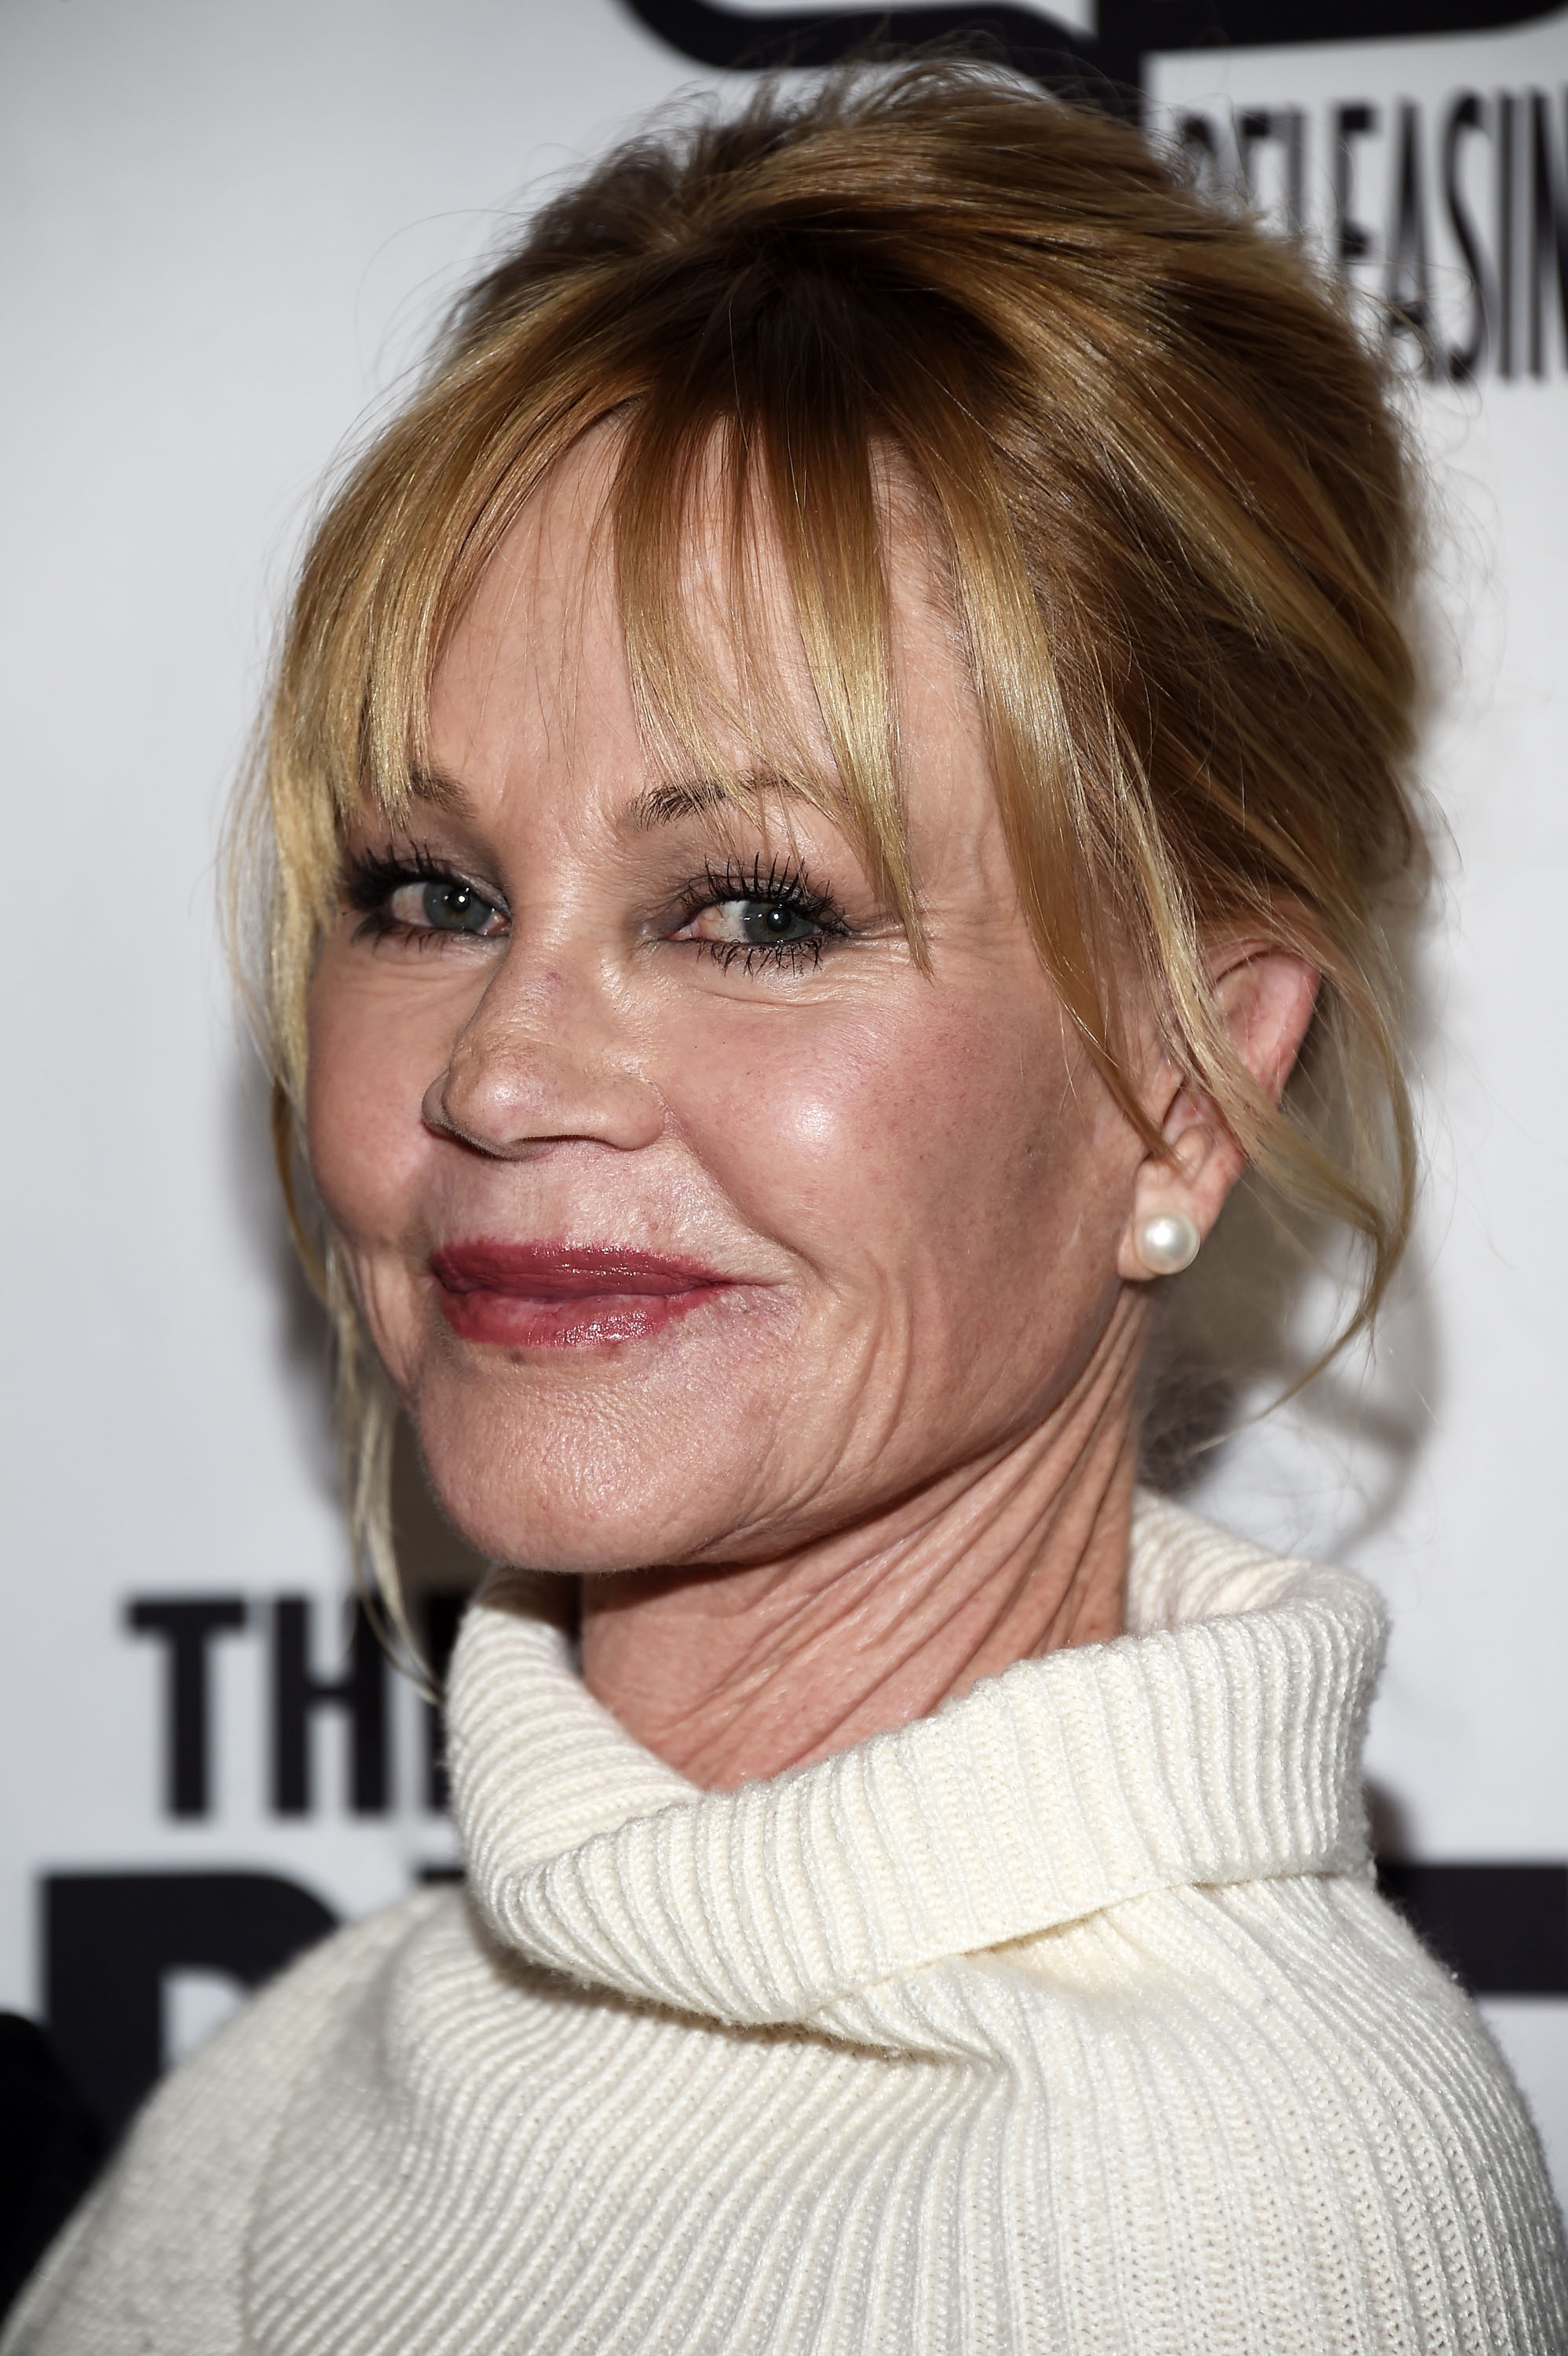 Melanie Griffith arrives at the premiere of Front Row Filmed Entertainment's "The Pirates of Somalia" in Hollywood, California, on December 6, 2017. | Source: Getty Images